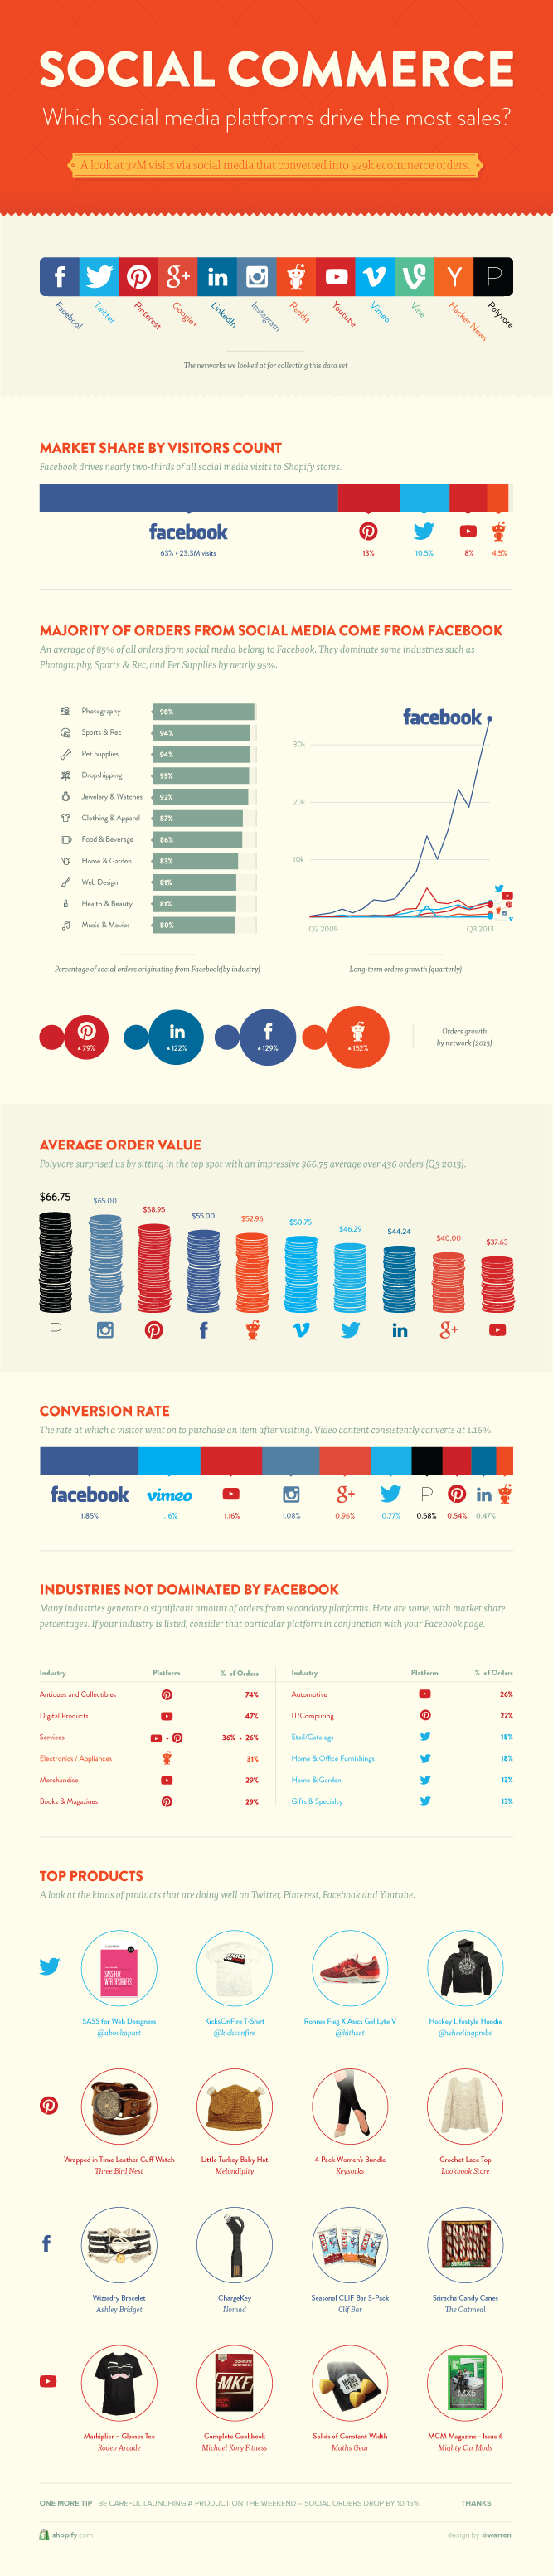 Social-growth-infographic